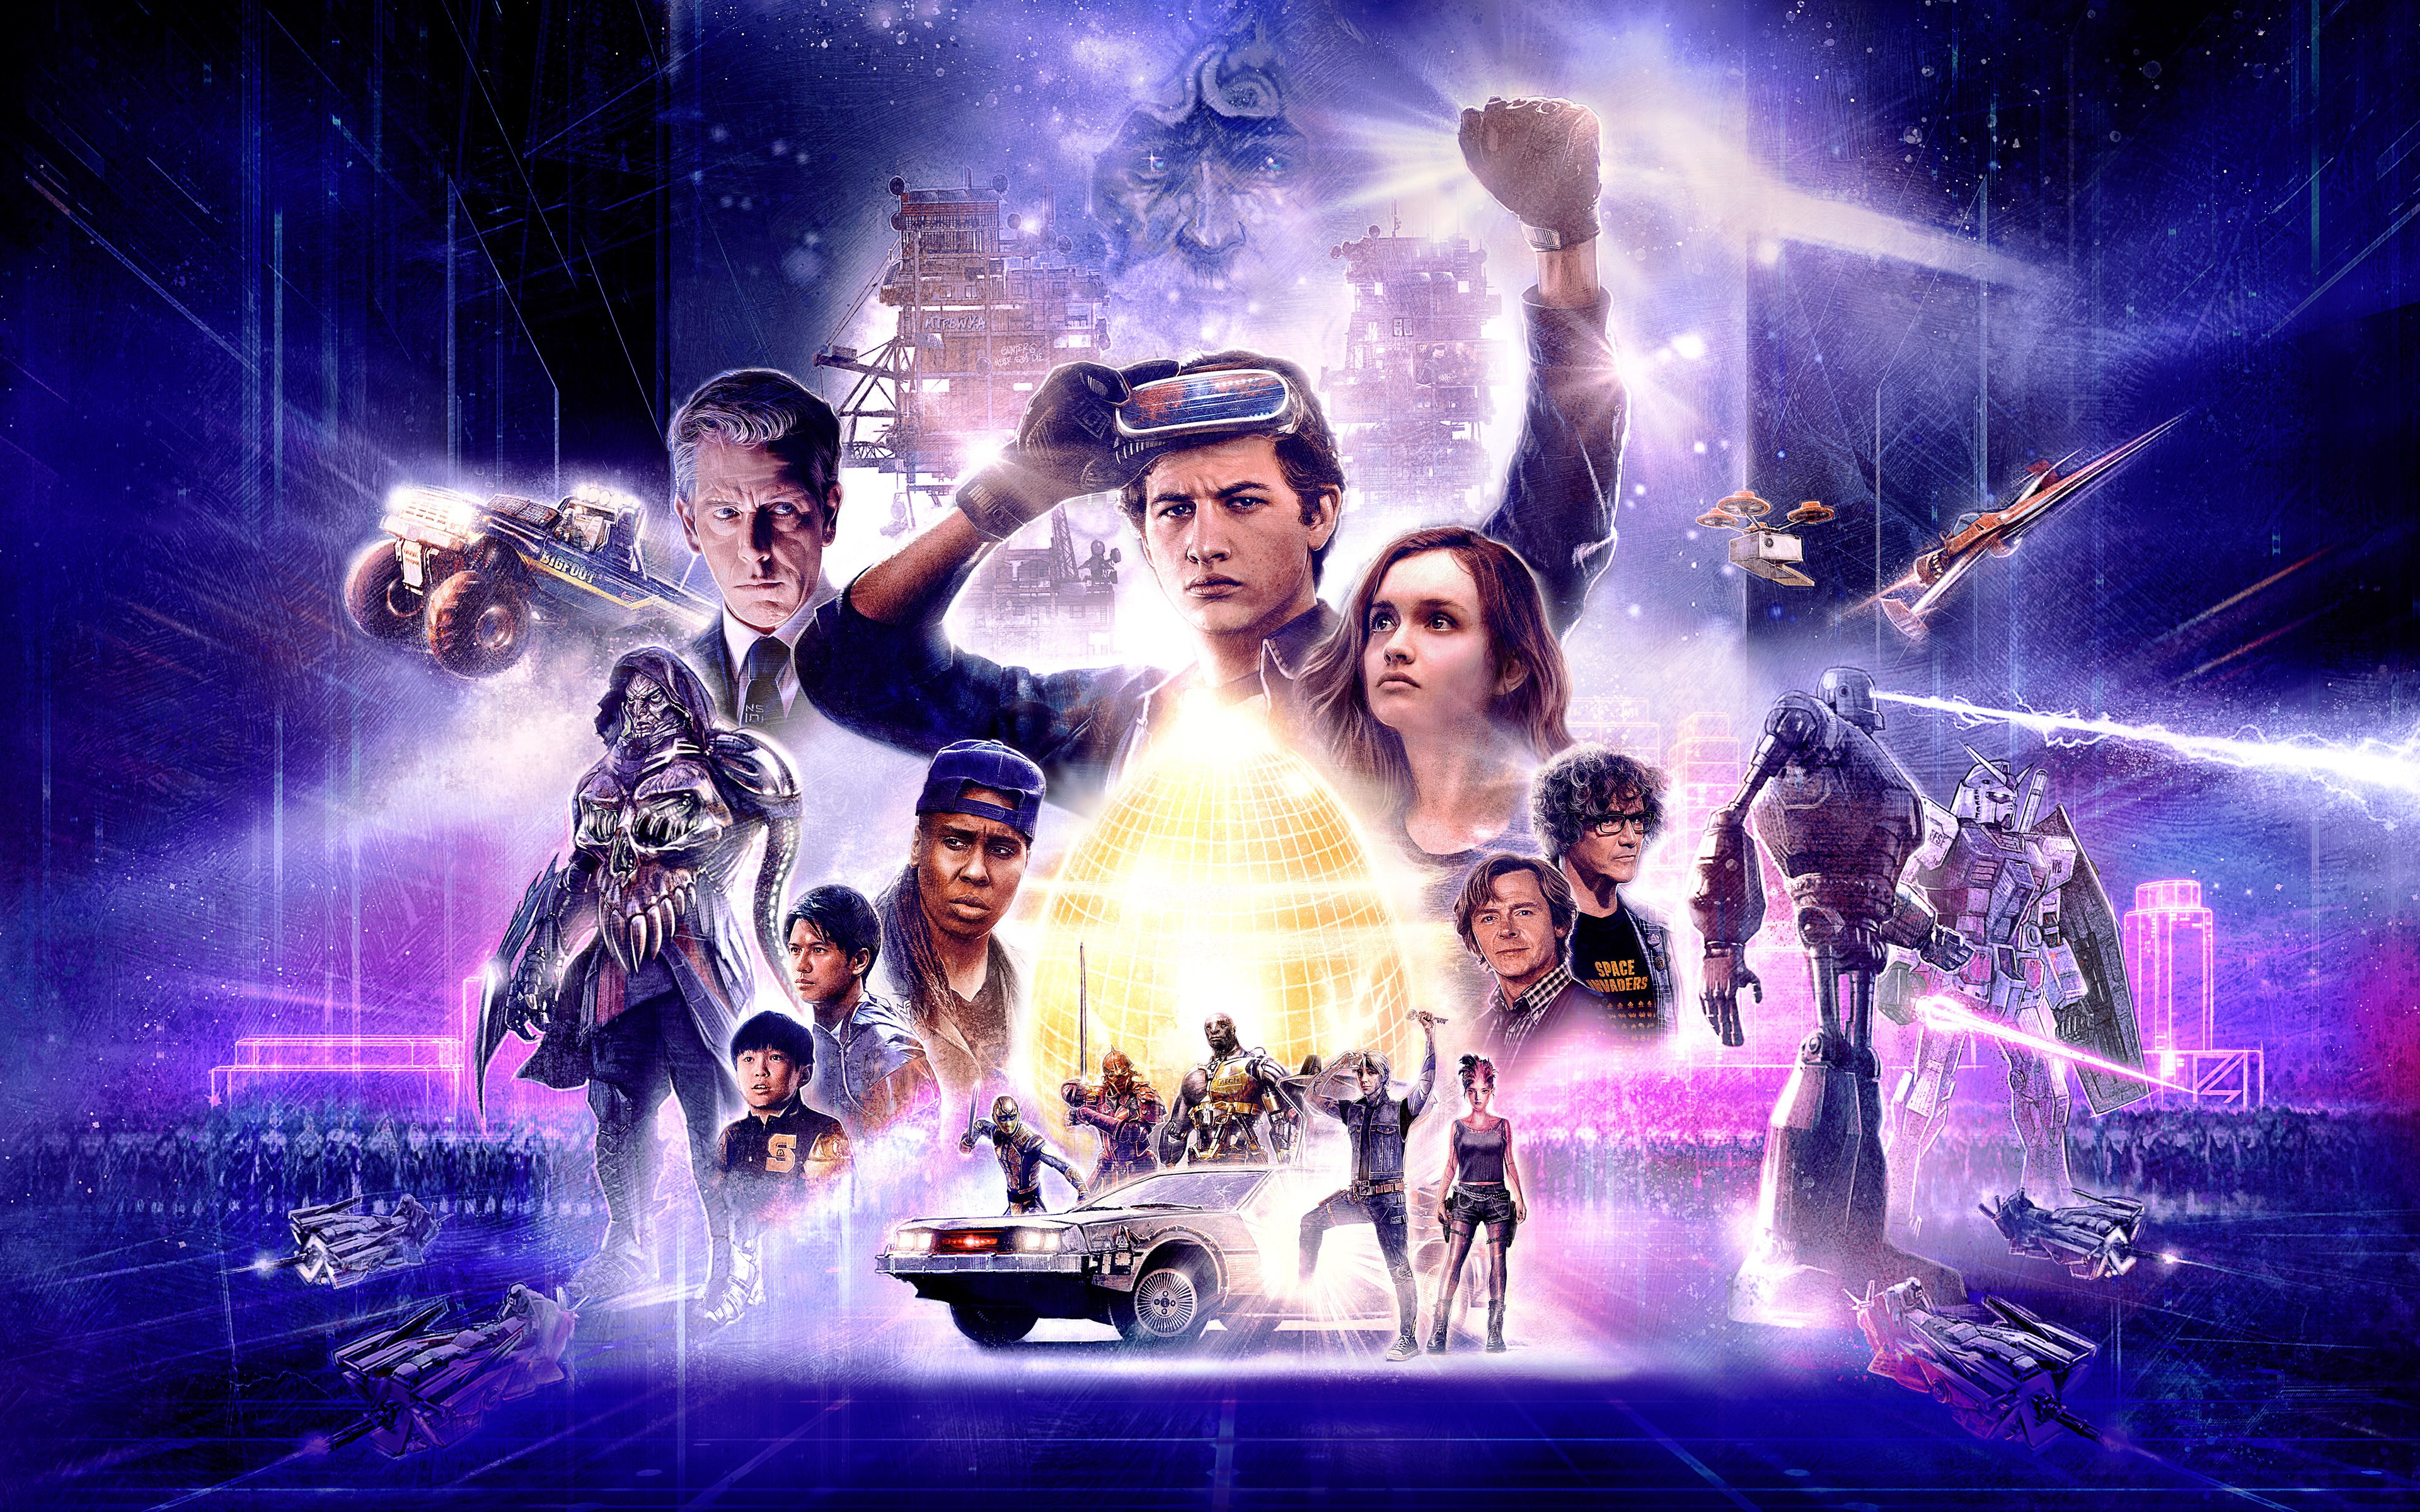 Ready Player One poster wallpaper 3840x2400